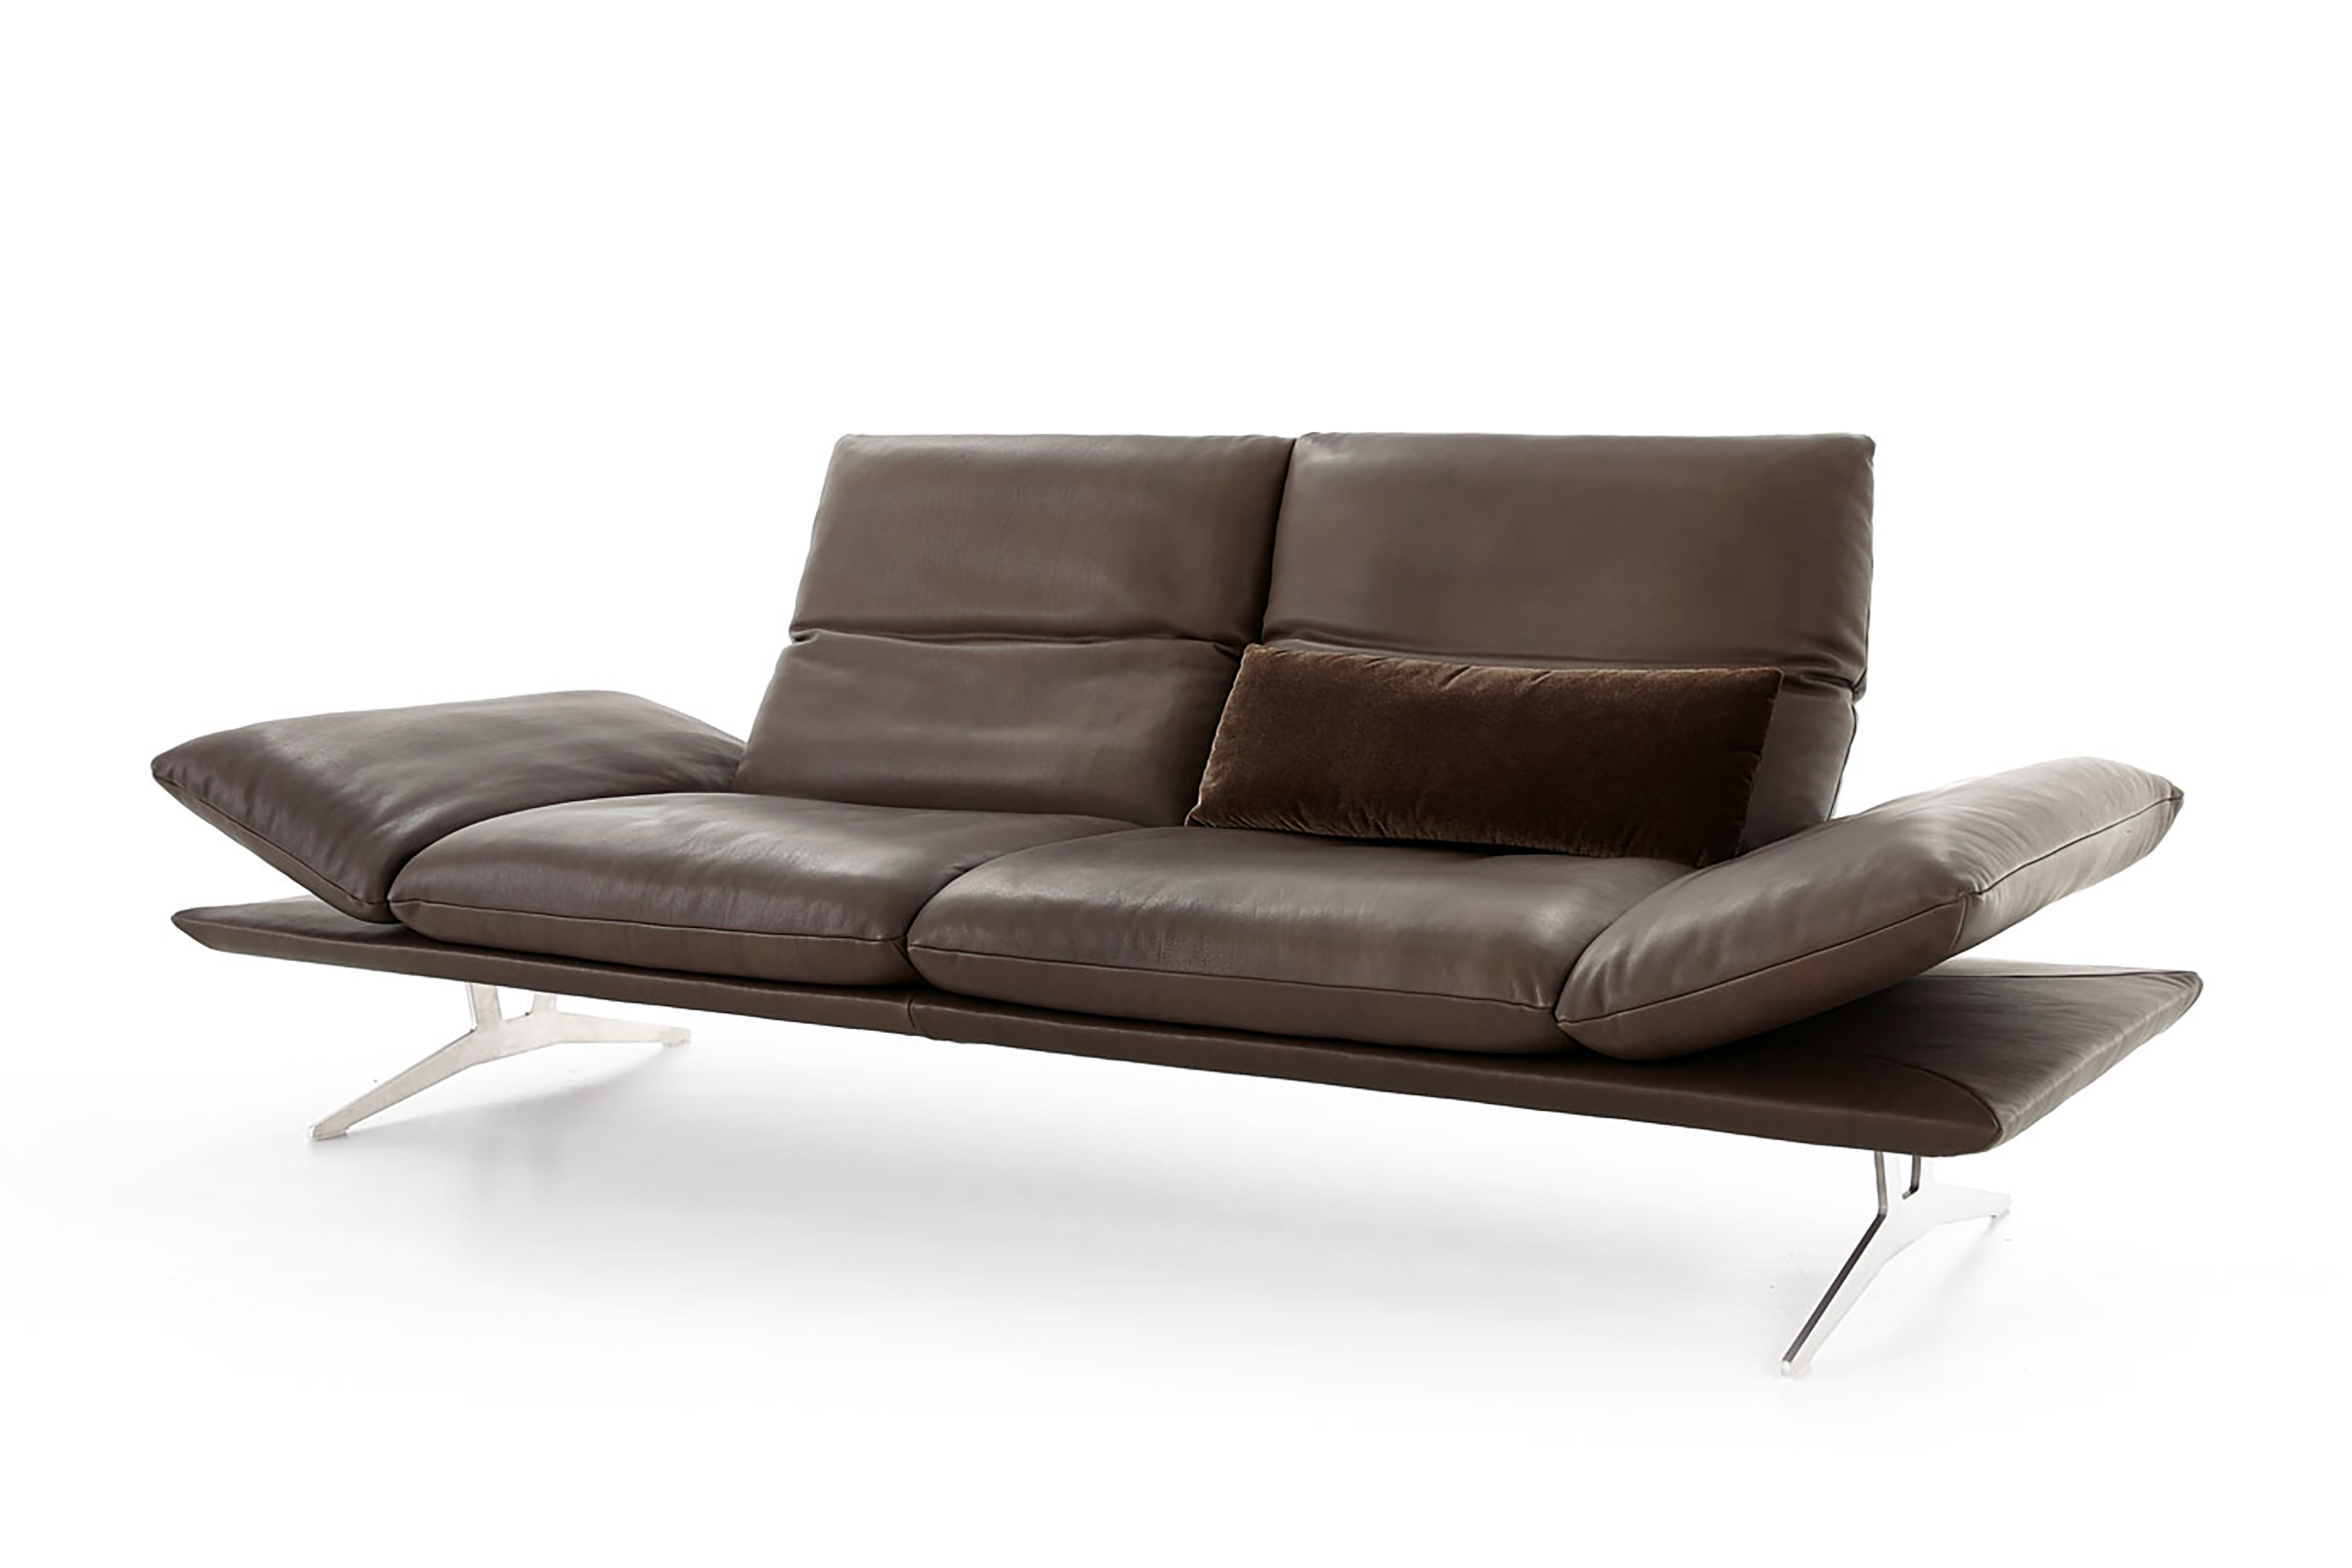 FRANCIS 2 Seater Sofa in Leather by Koinor